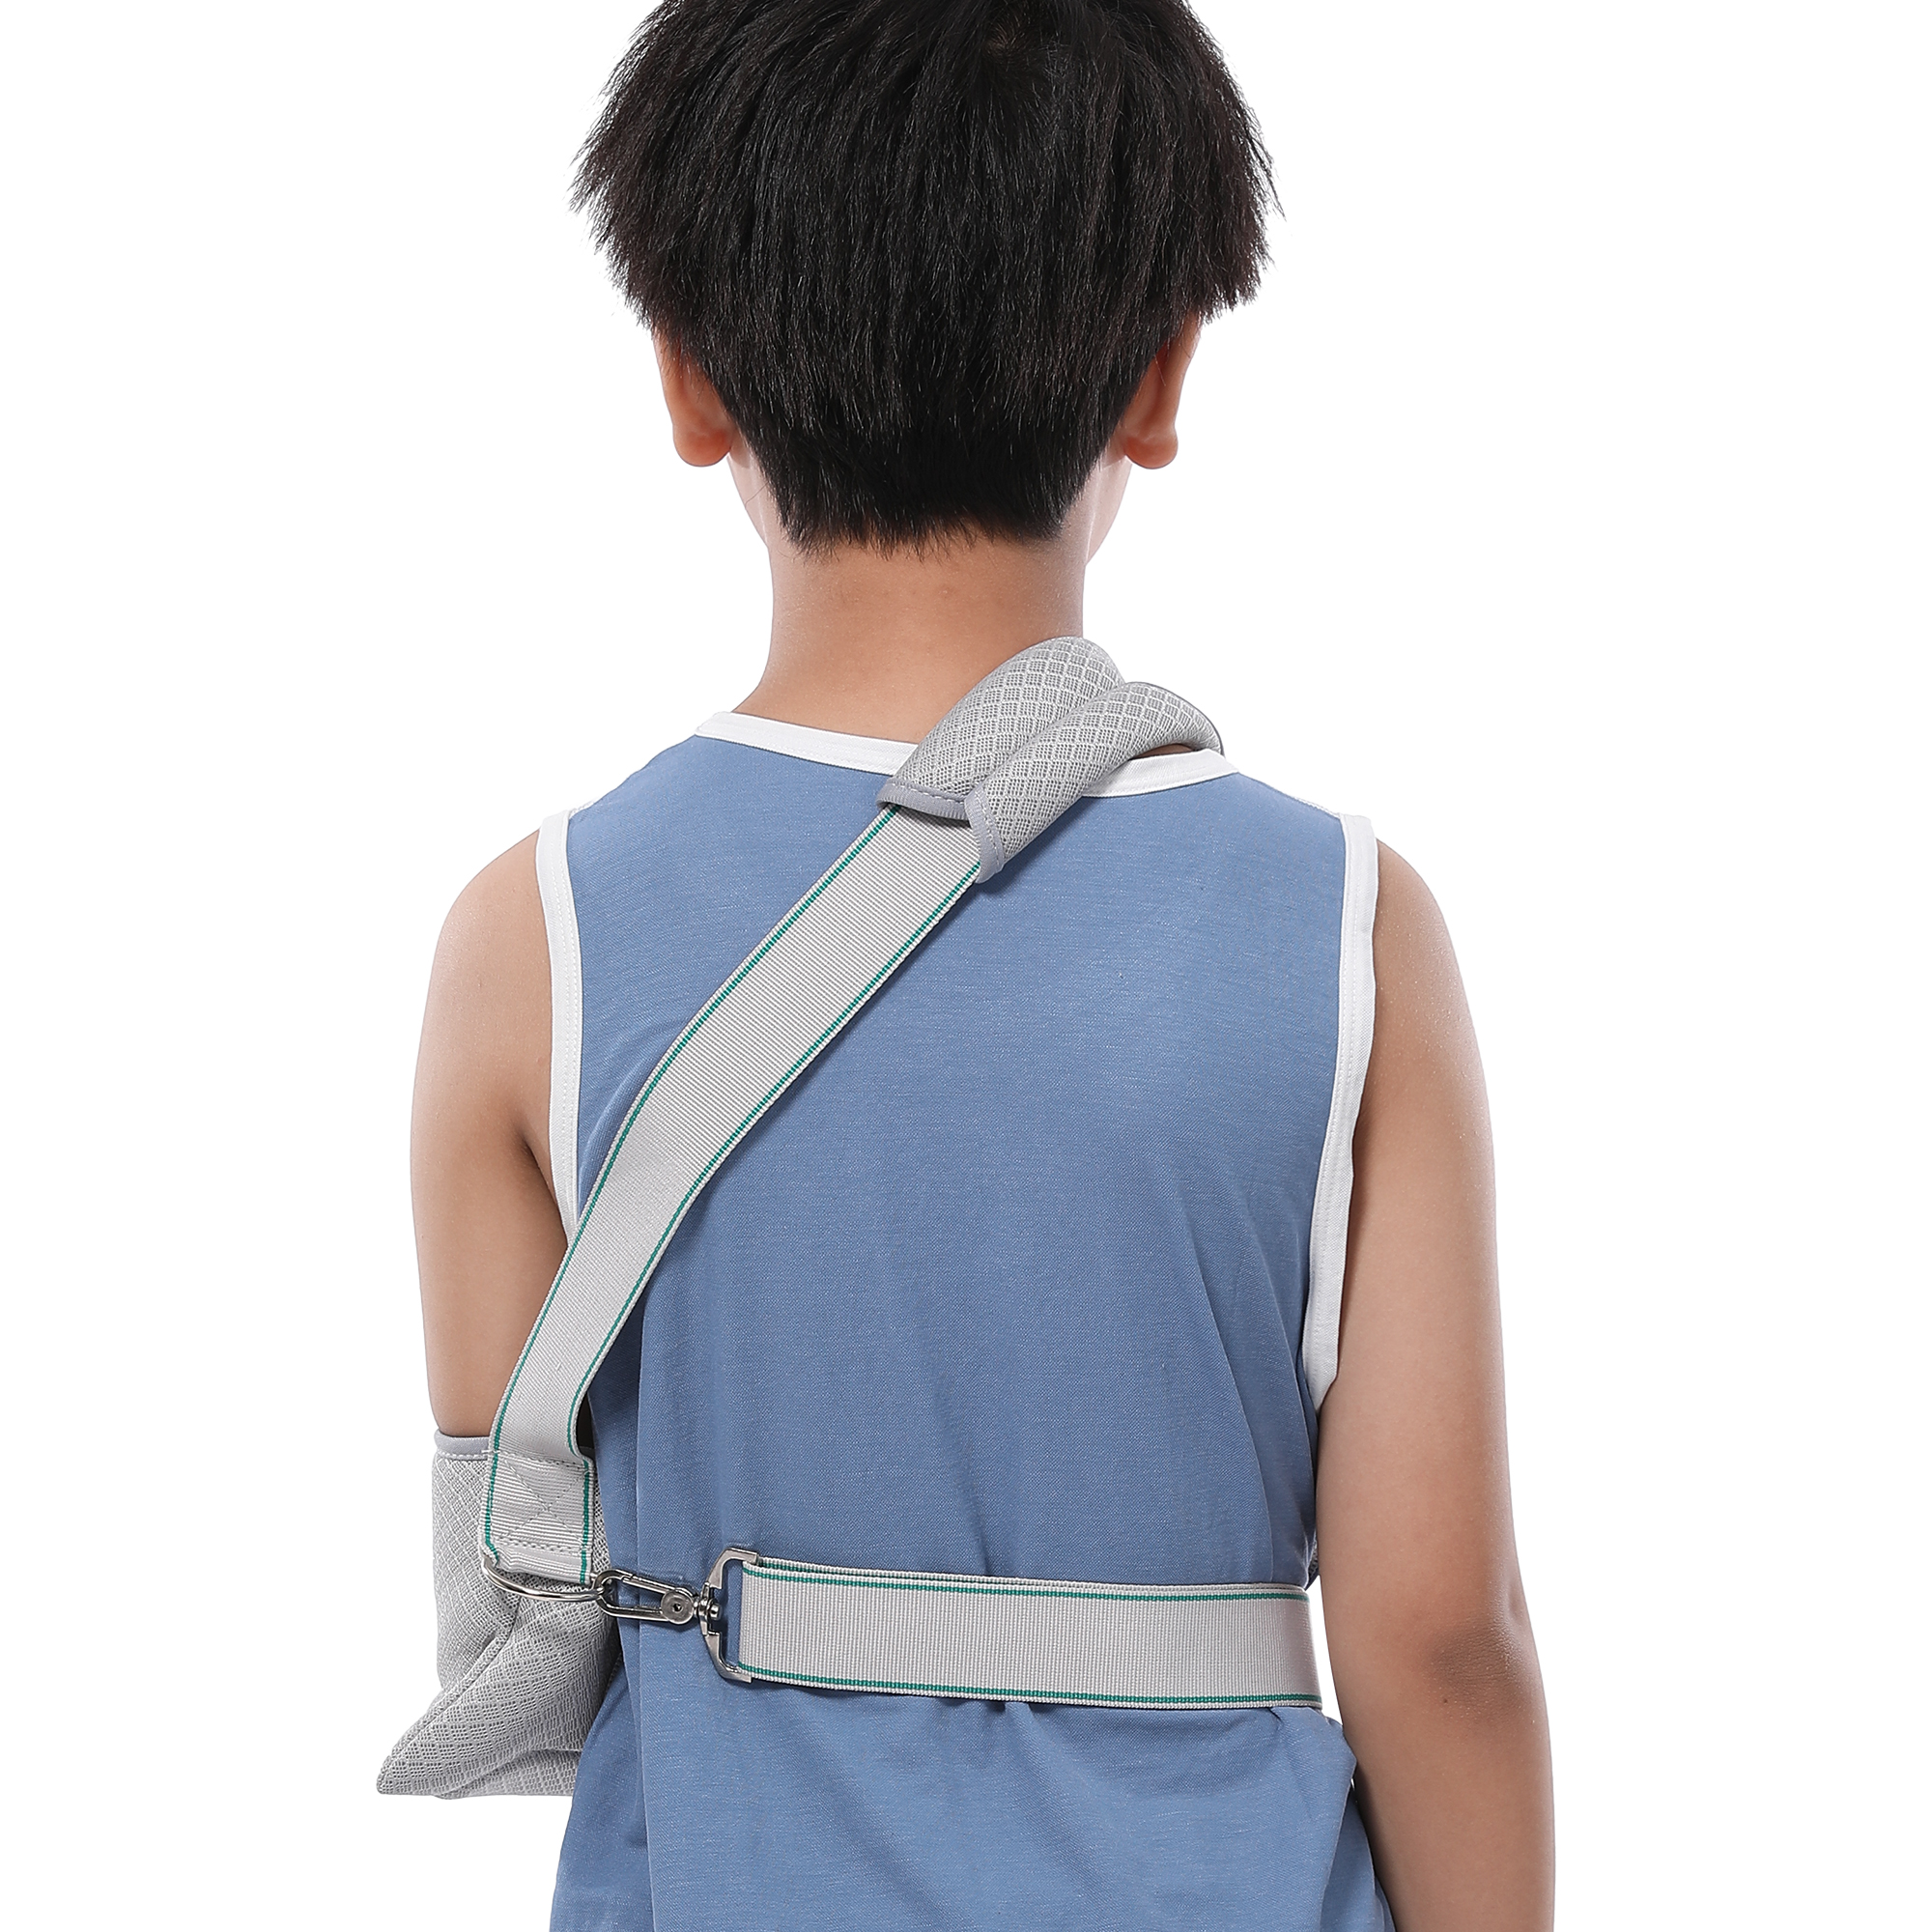 Orthopedic Immobilizer Elbow Joint Protection Arm Sling Shoulder Support Brace